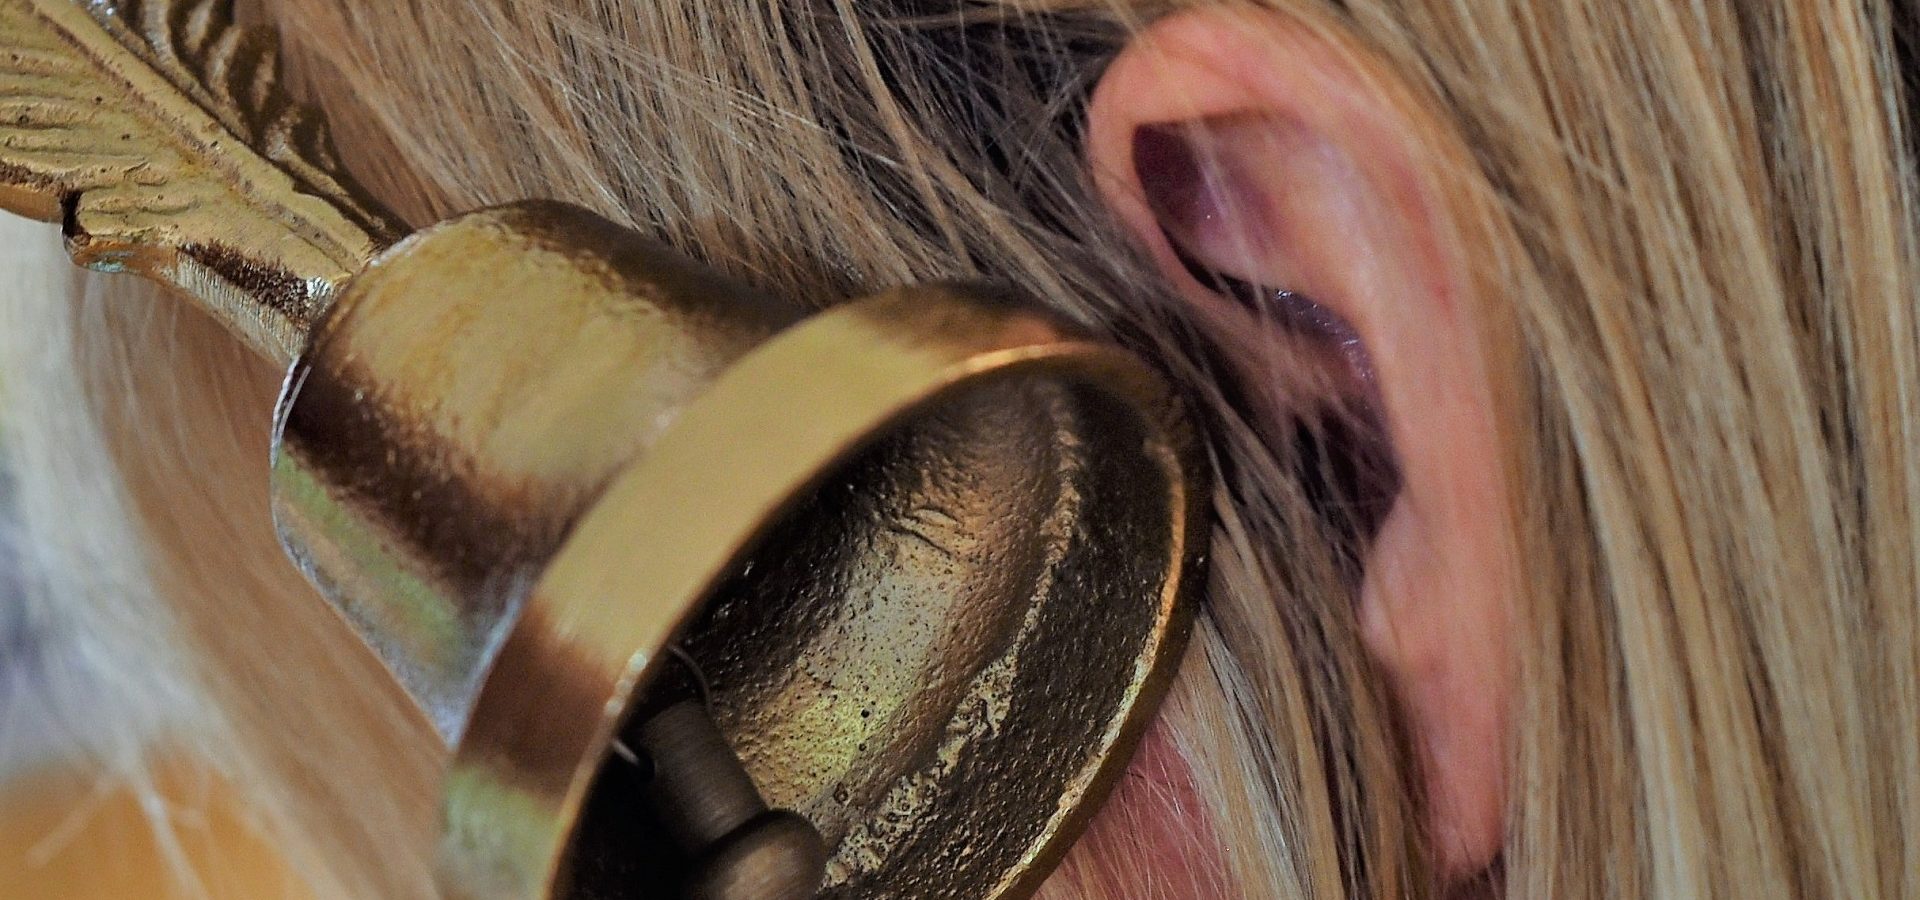 A bell placed next to a womans ear, representing the ringing sound associated with tinnitus